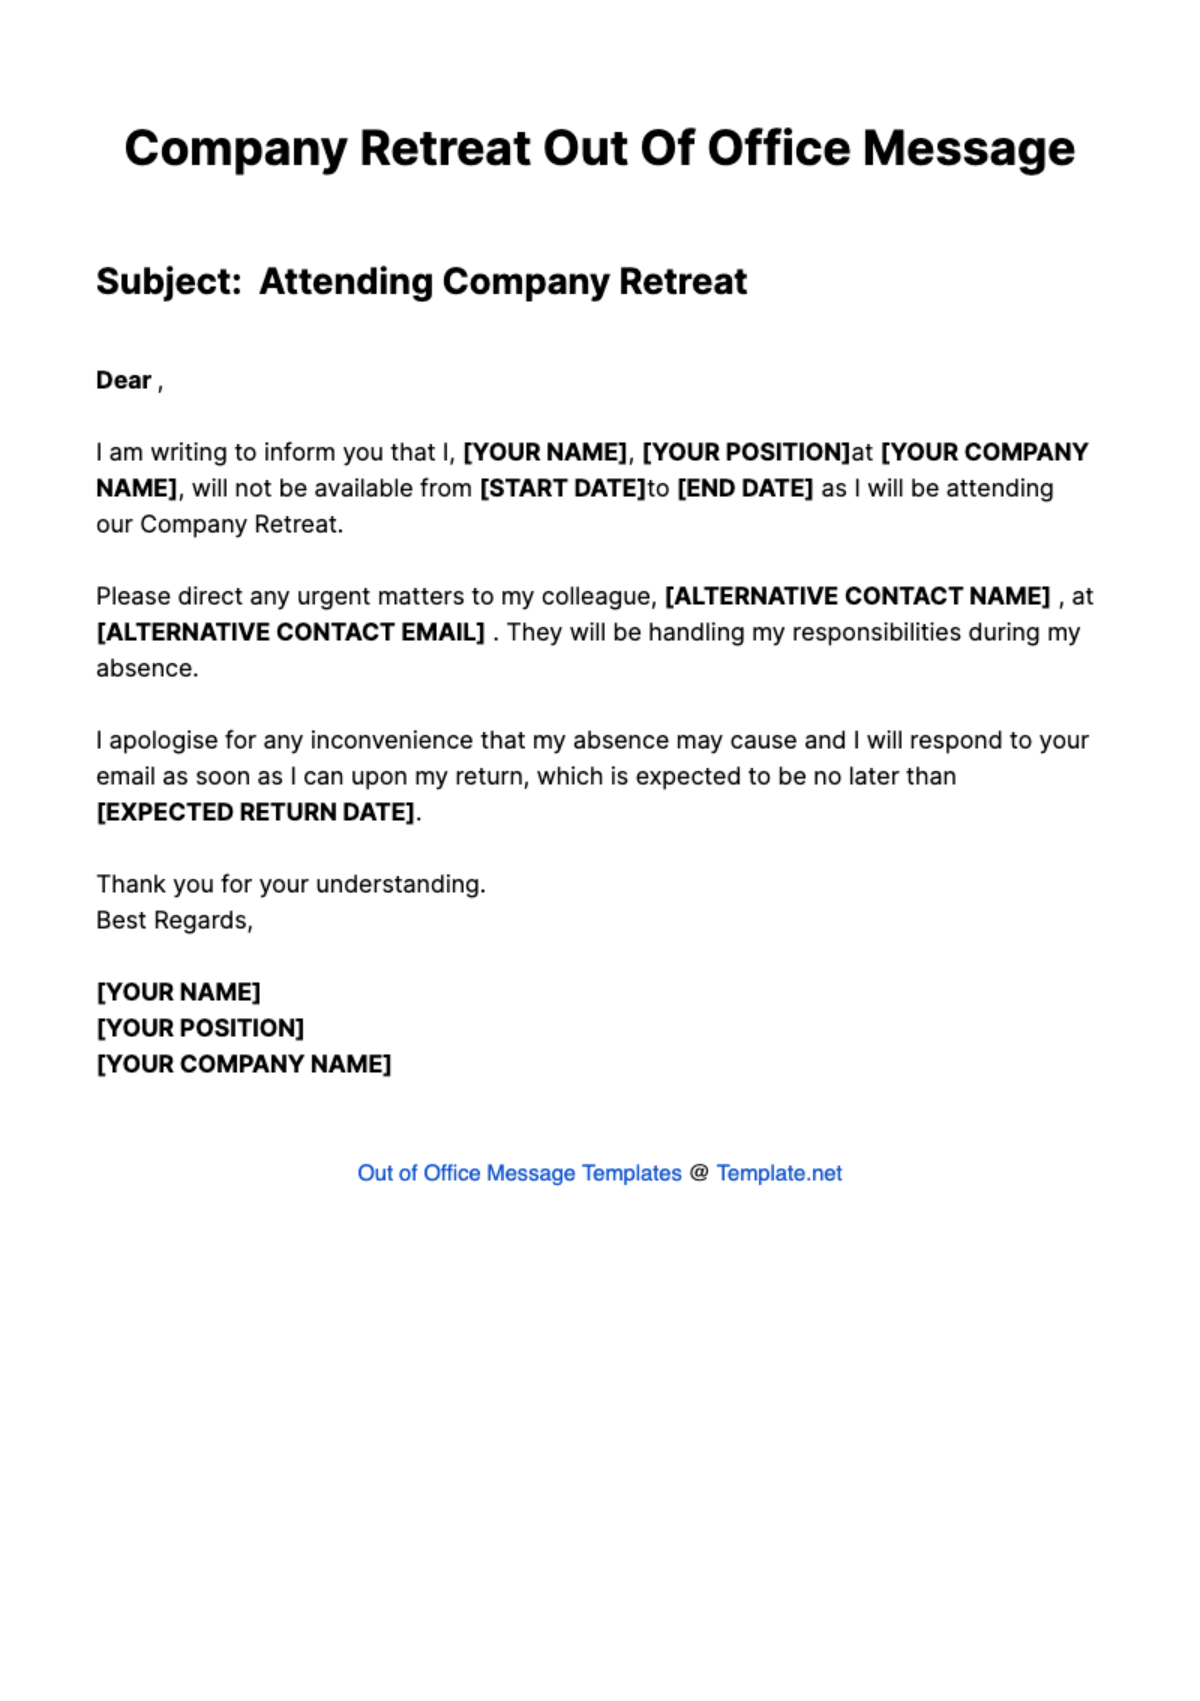 Free Company Retreat Out Of Office Message Template